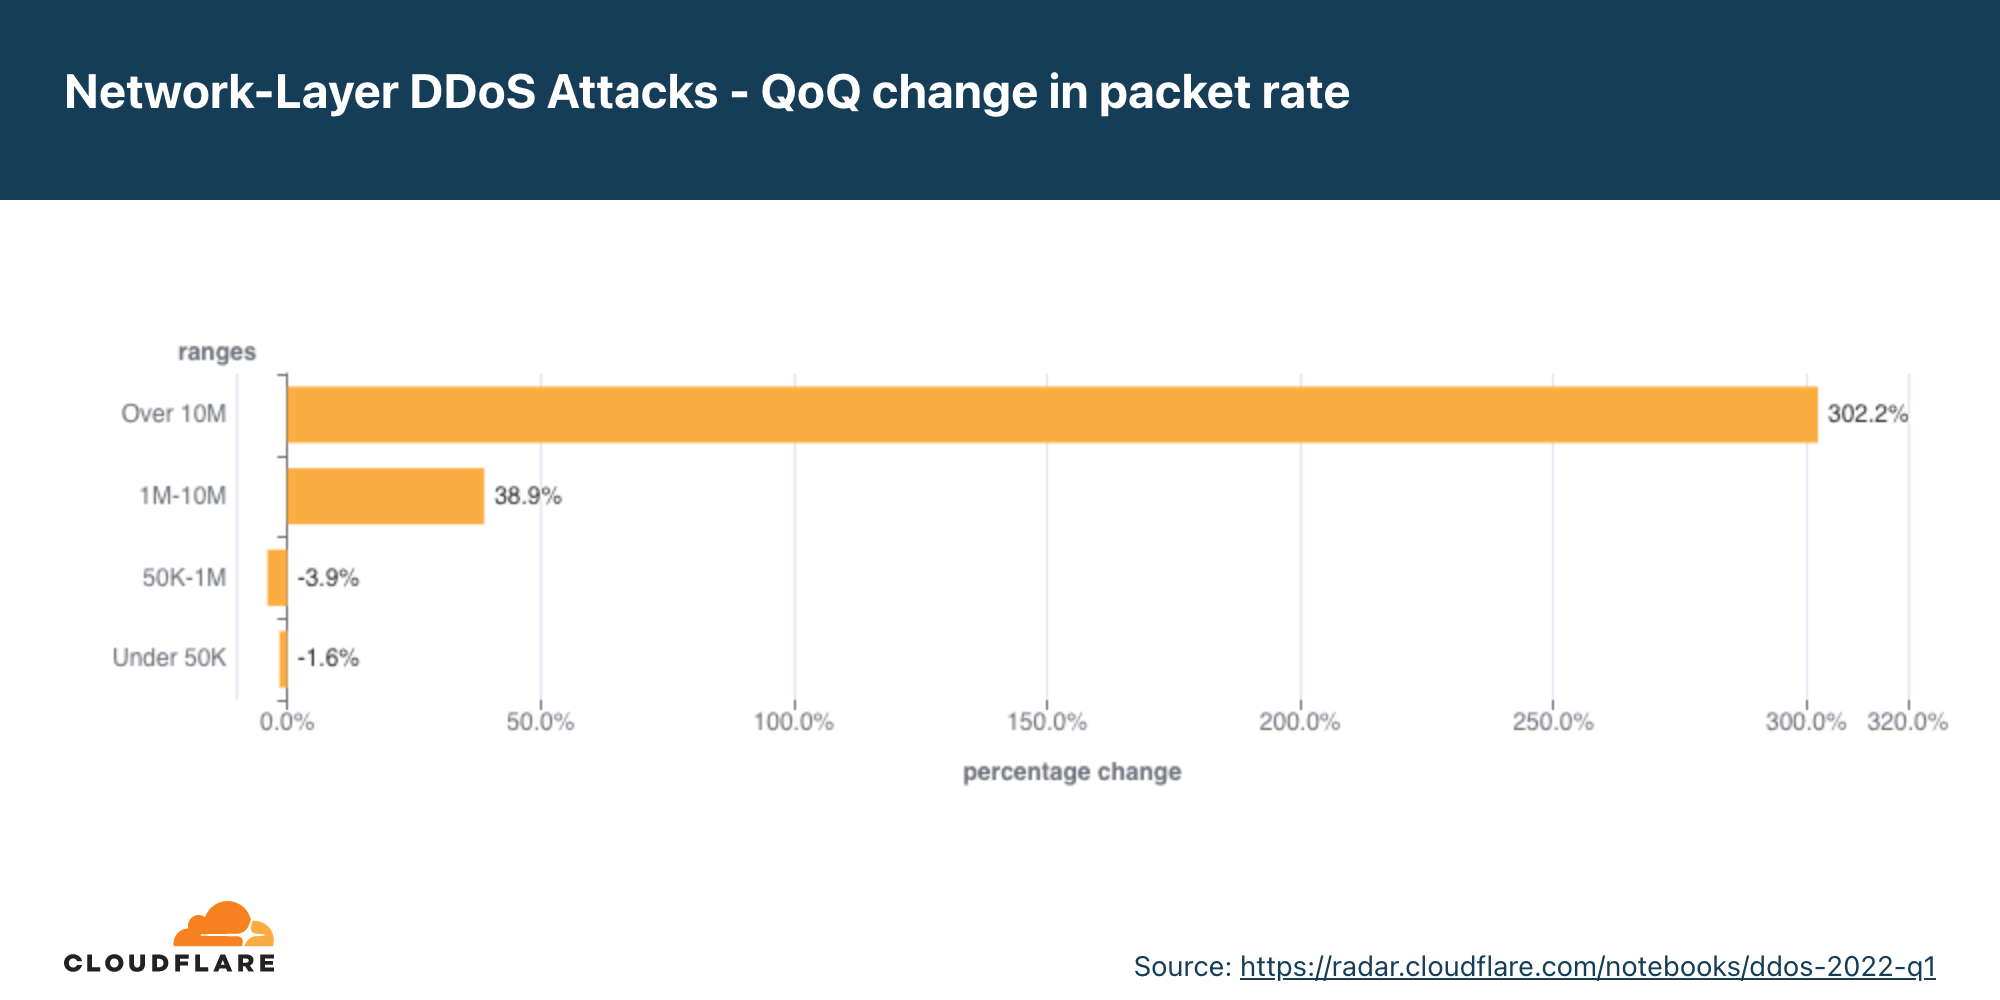 Graph of the change in the distribution of network-layer DDoS attacks by packet rate quarter over quarter